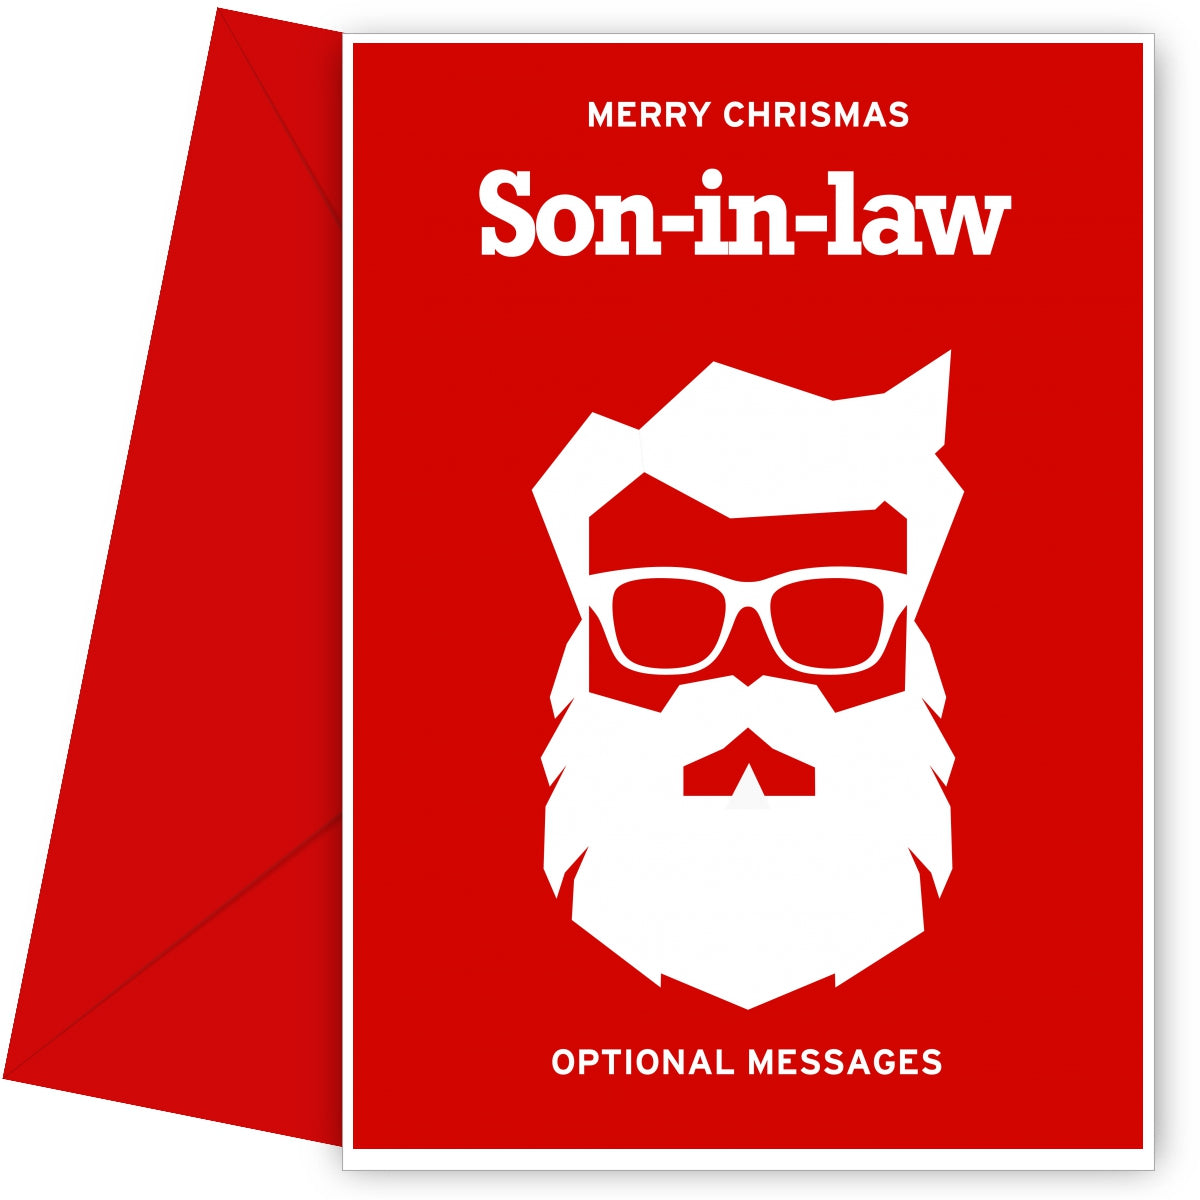 Merry Christmas Card for Son-in-law - Hipster Santa